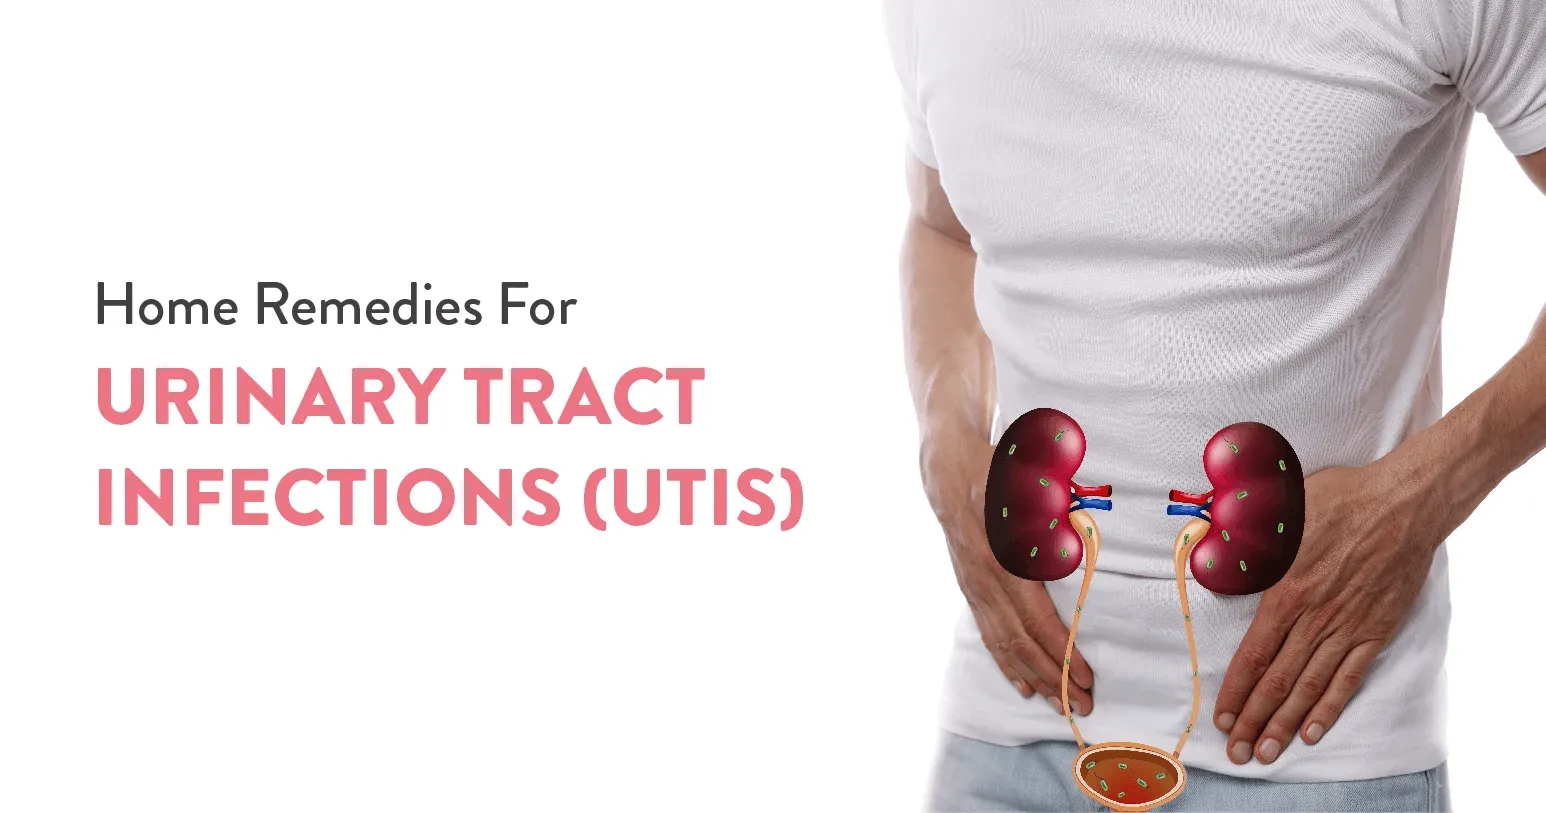 Home-Remedies-for-Urinary-Tract-Infections